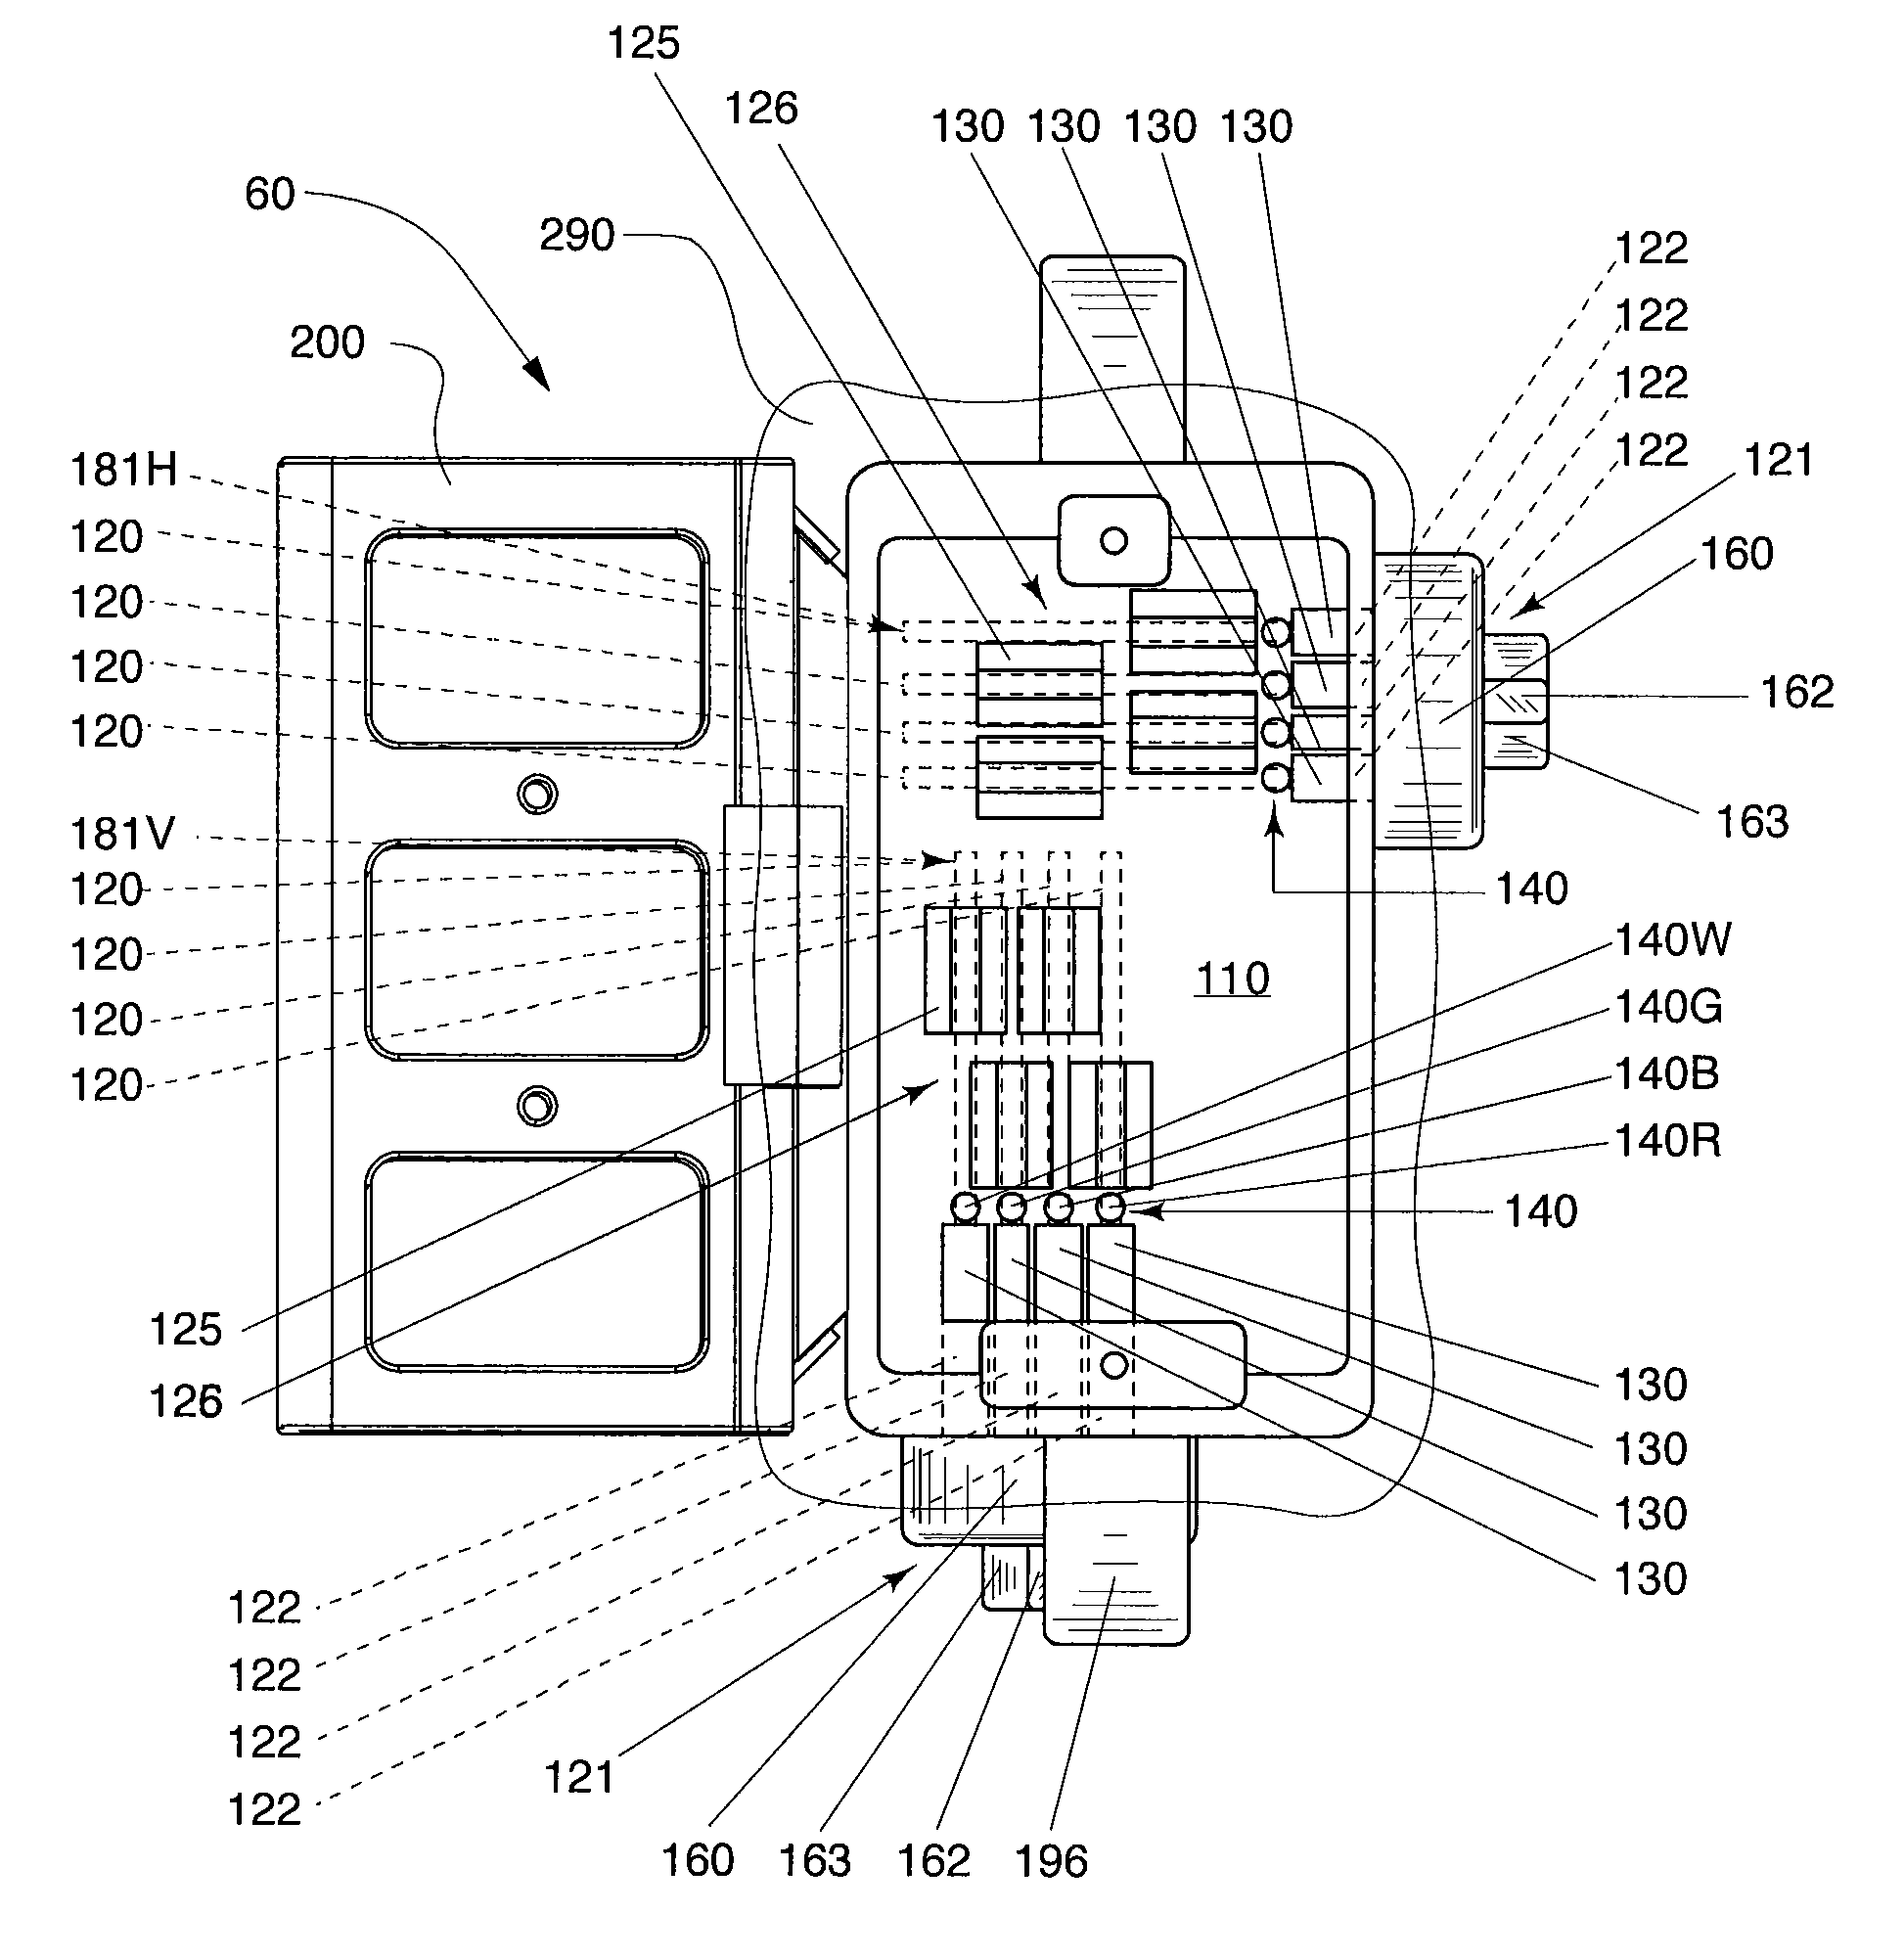 Electrical apparatus having quick connect components